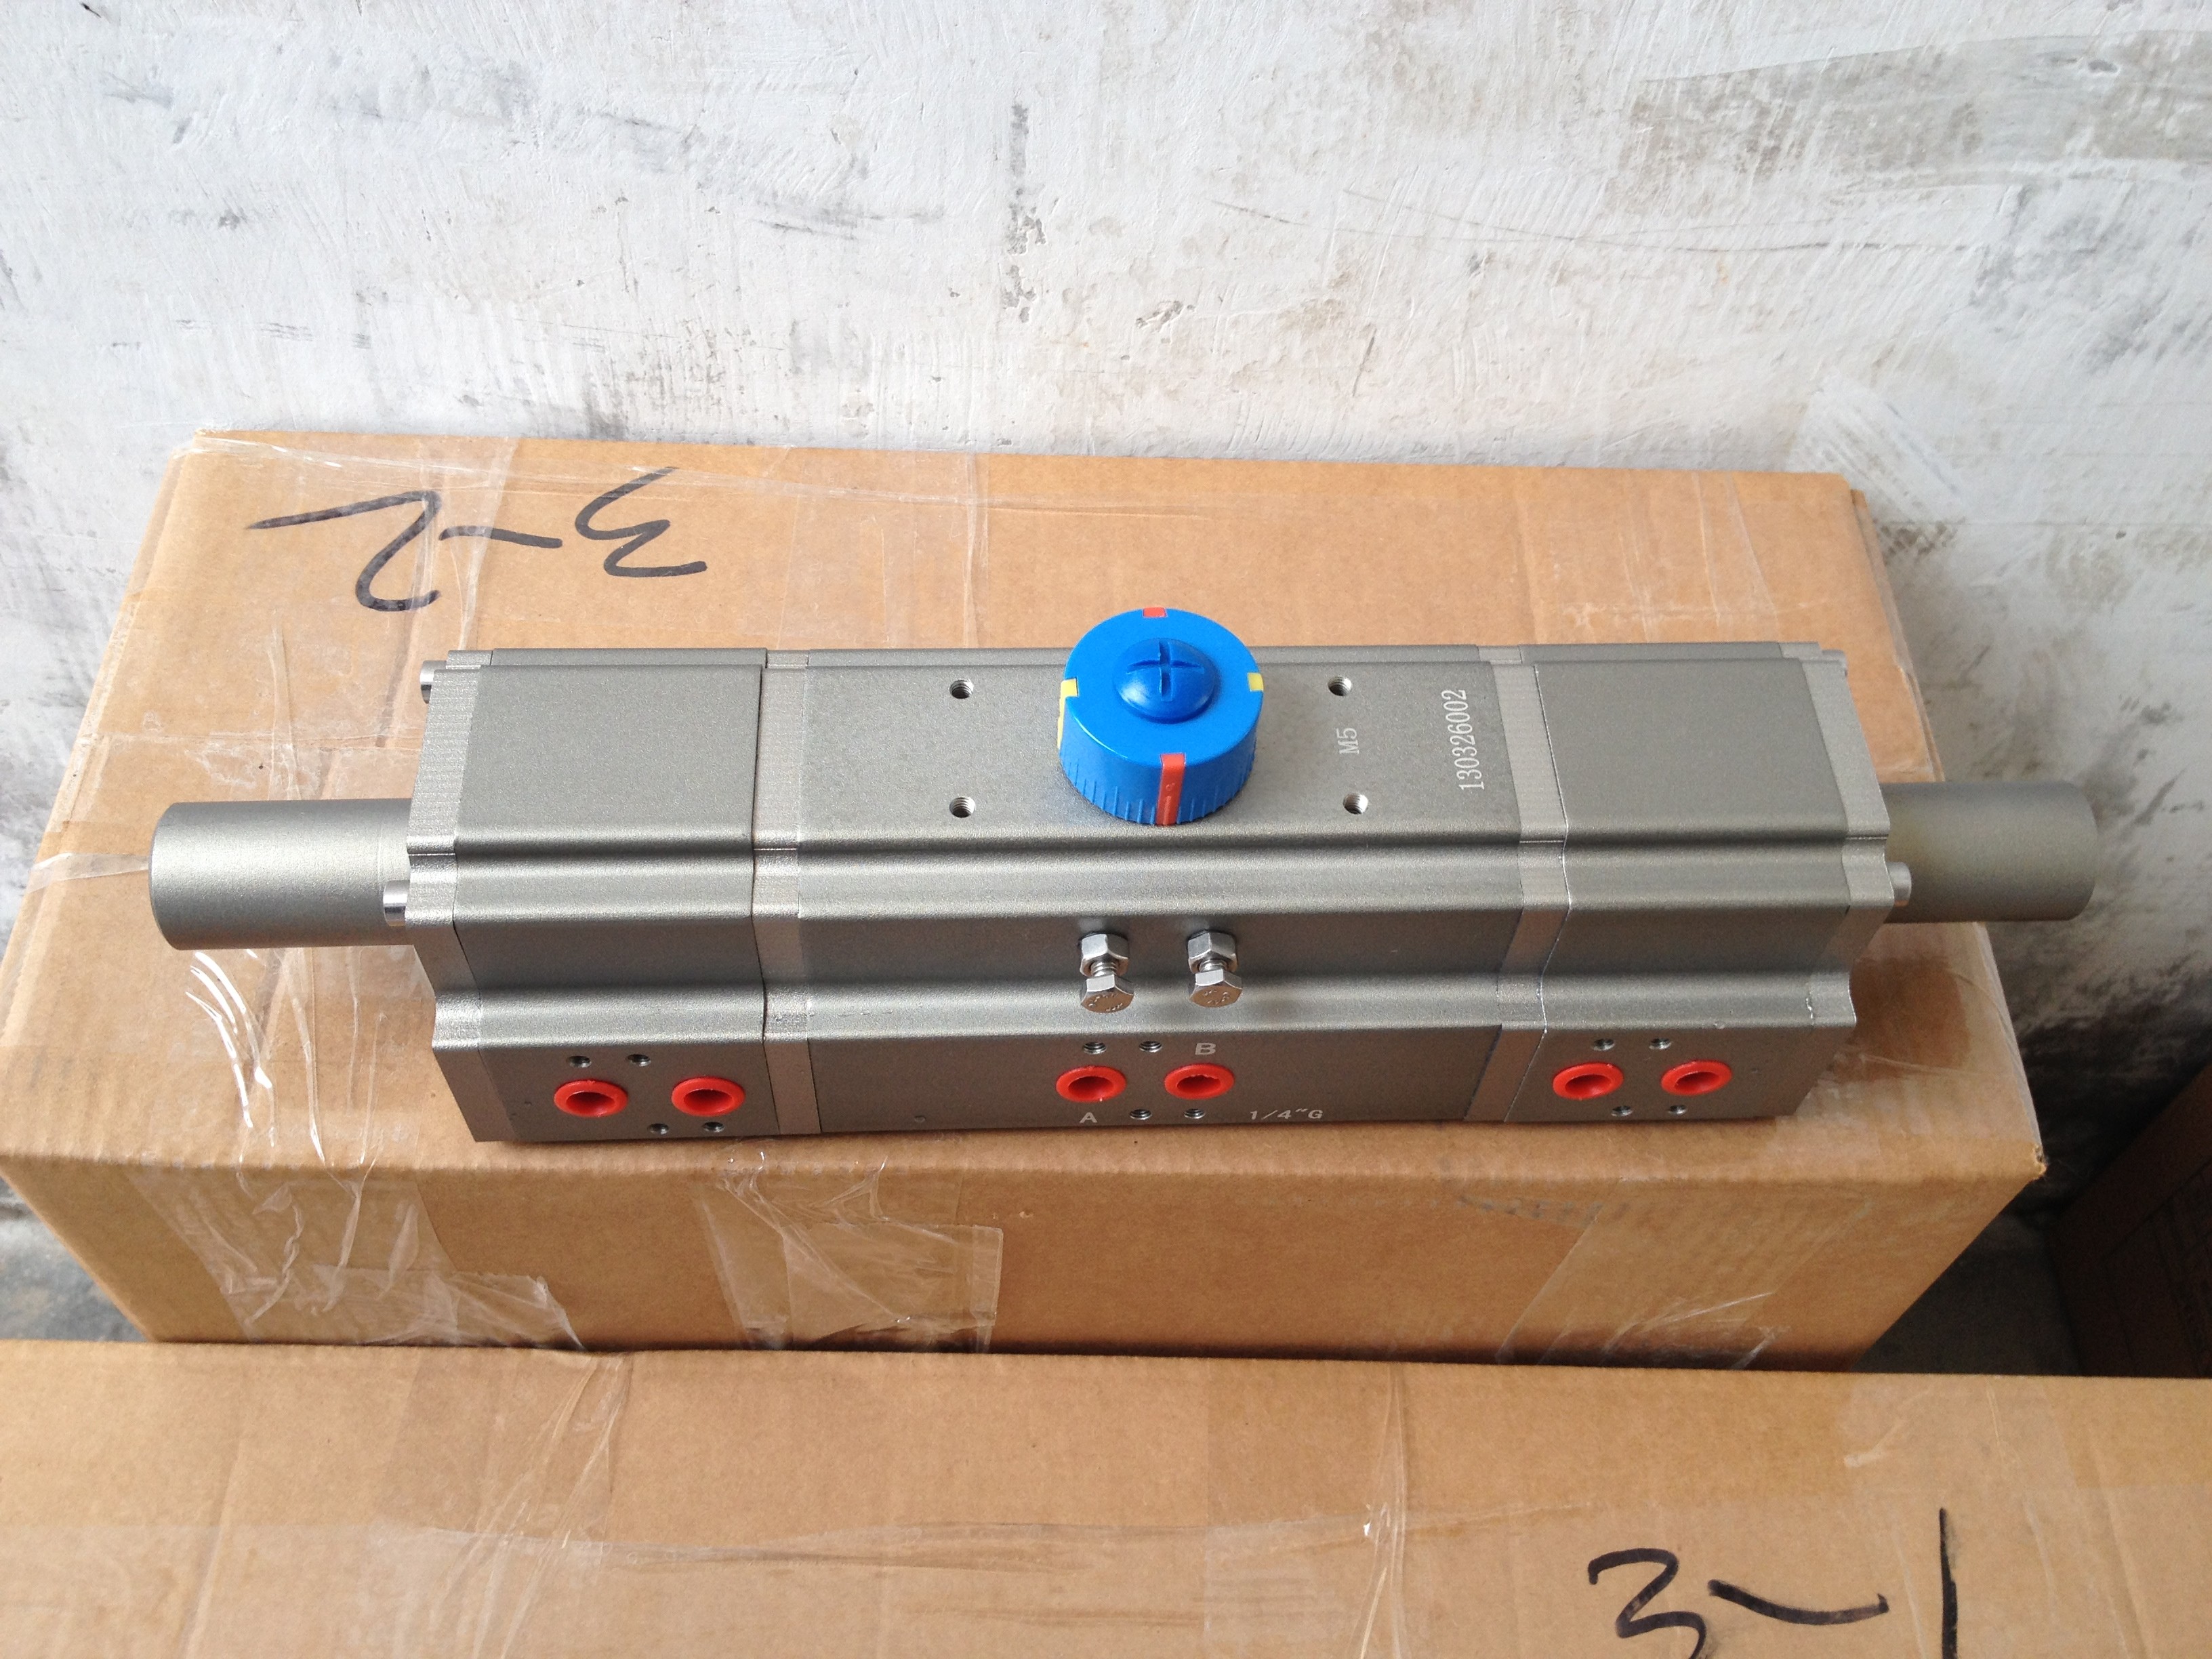 0-180 degree customized pneumatic rotary actuator for butterfly valve or ball